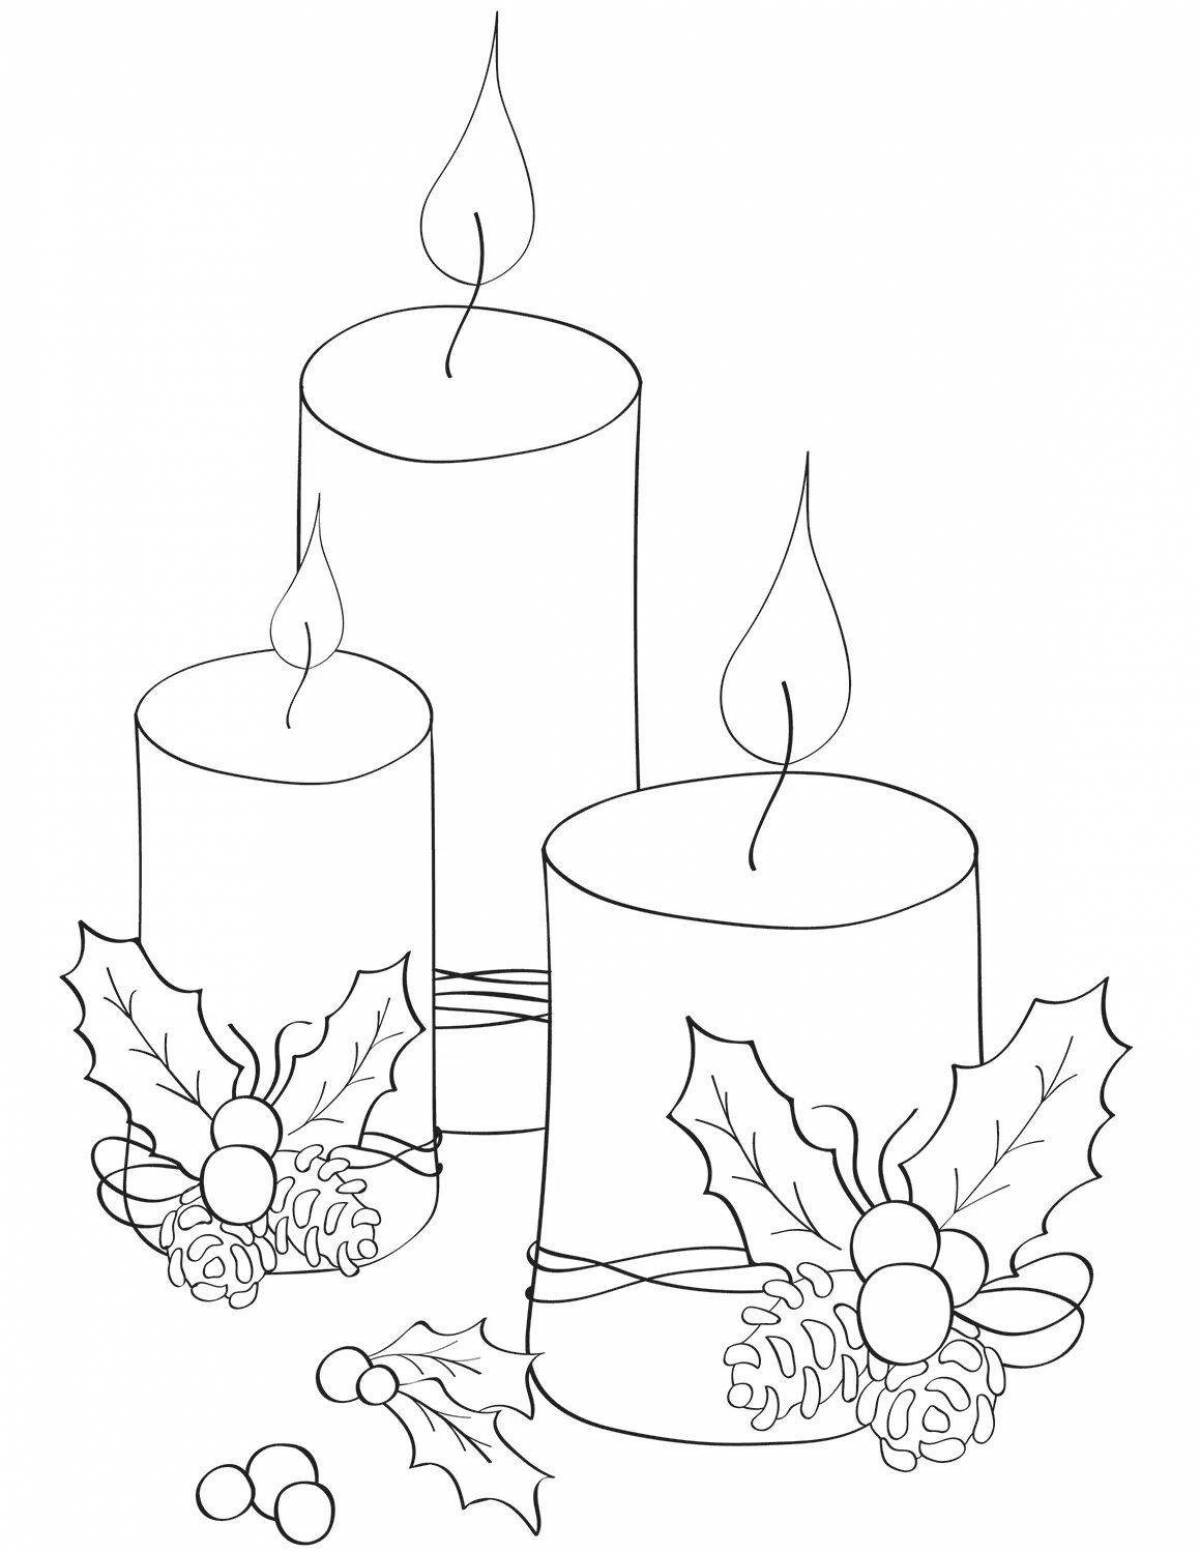 Adorable Christmas candle coloring page